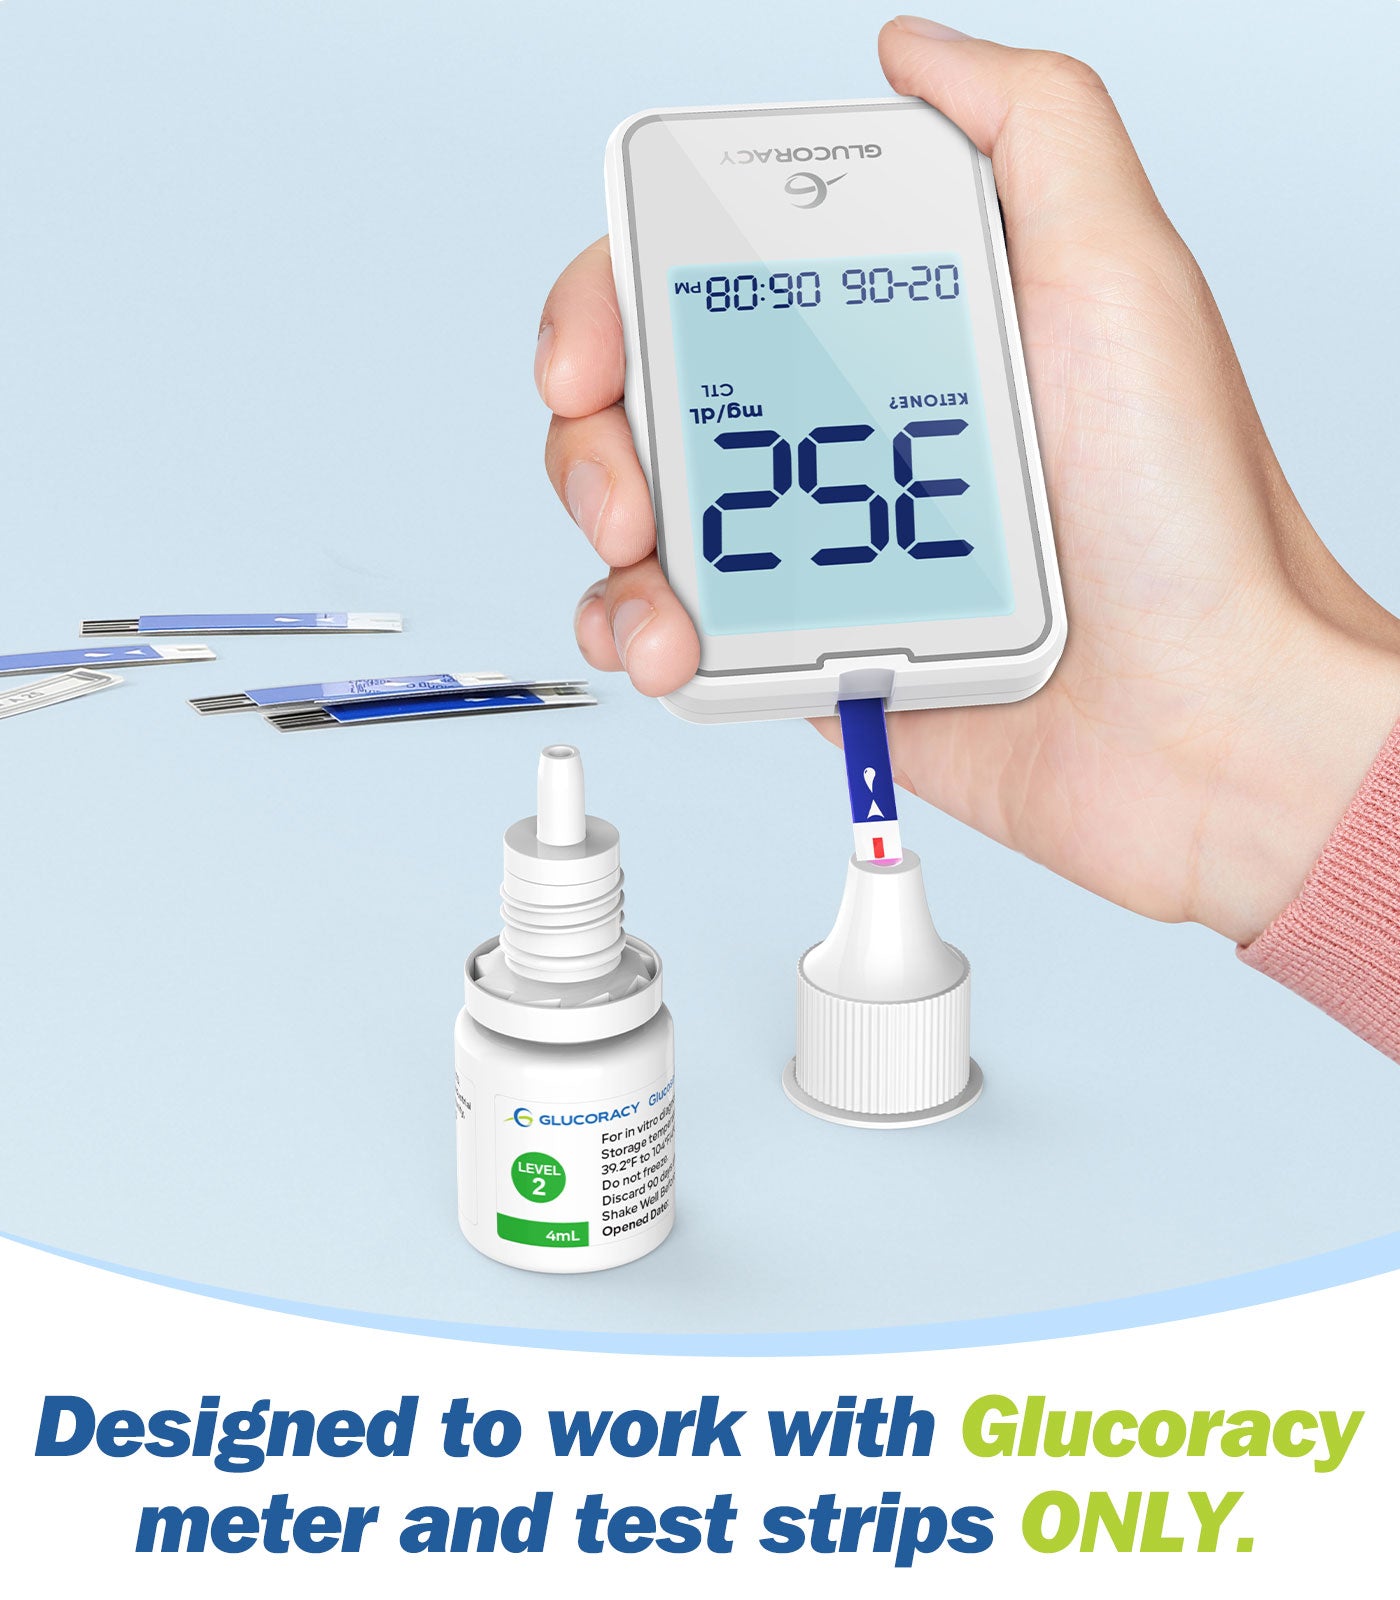 Glucoracy g-425-2 Glucose Control Solution | effective accuracy